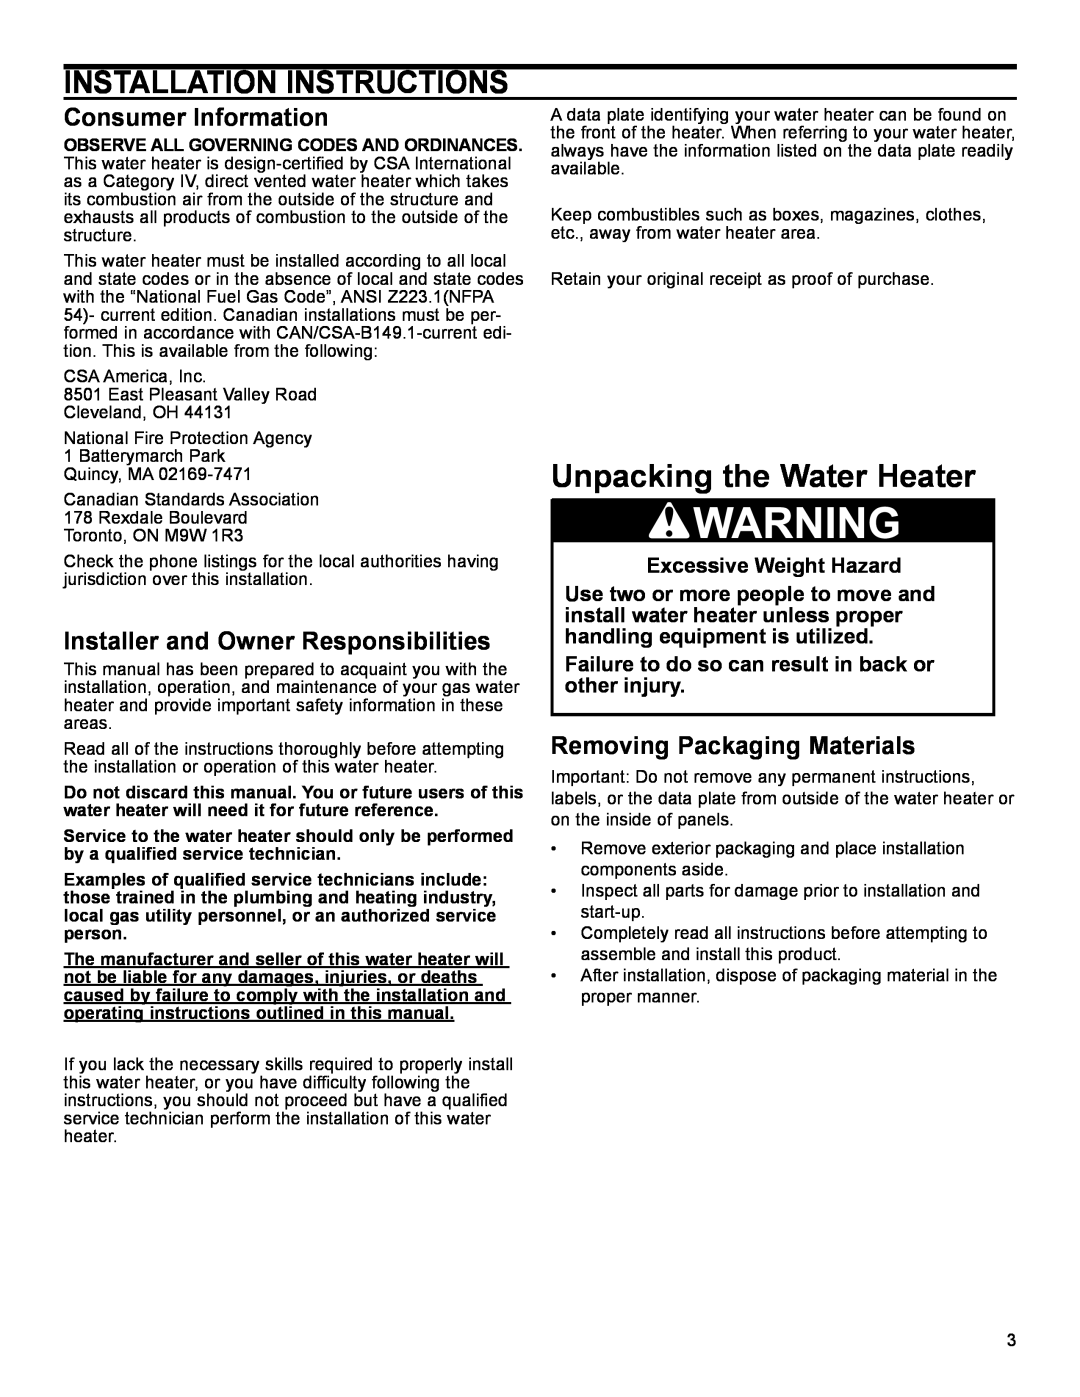 Polaris PC 199-50 3NV, PC 175-50 3NV Installation Instructions, Unpacking the Water Heater, Consumer Information 